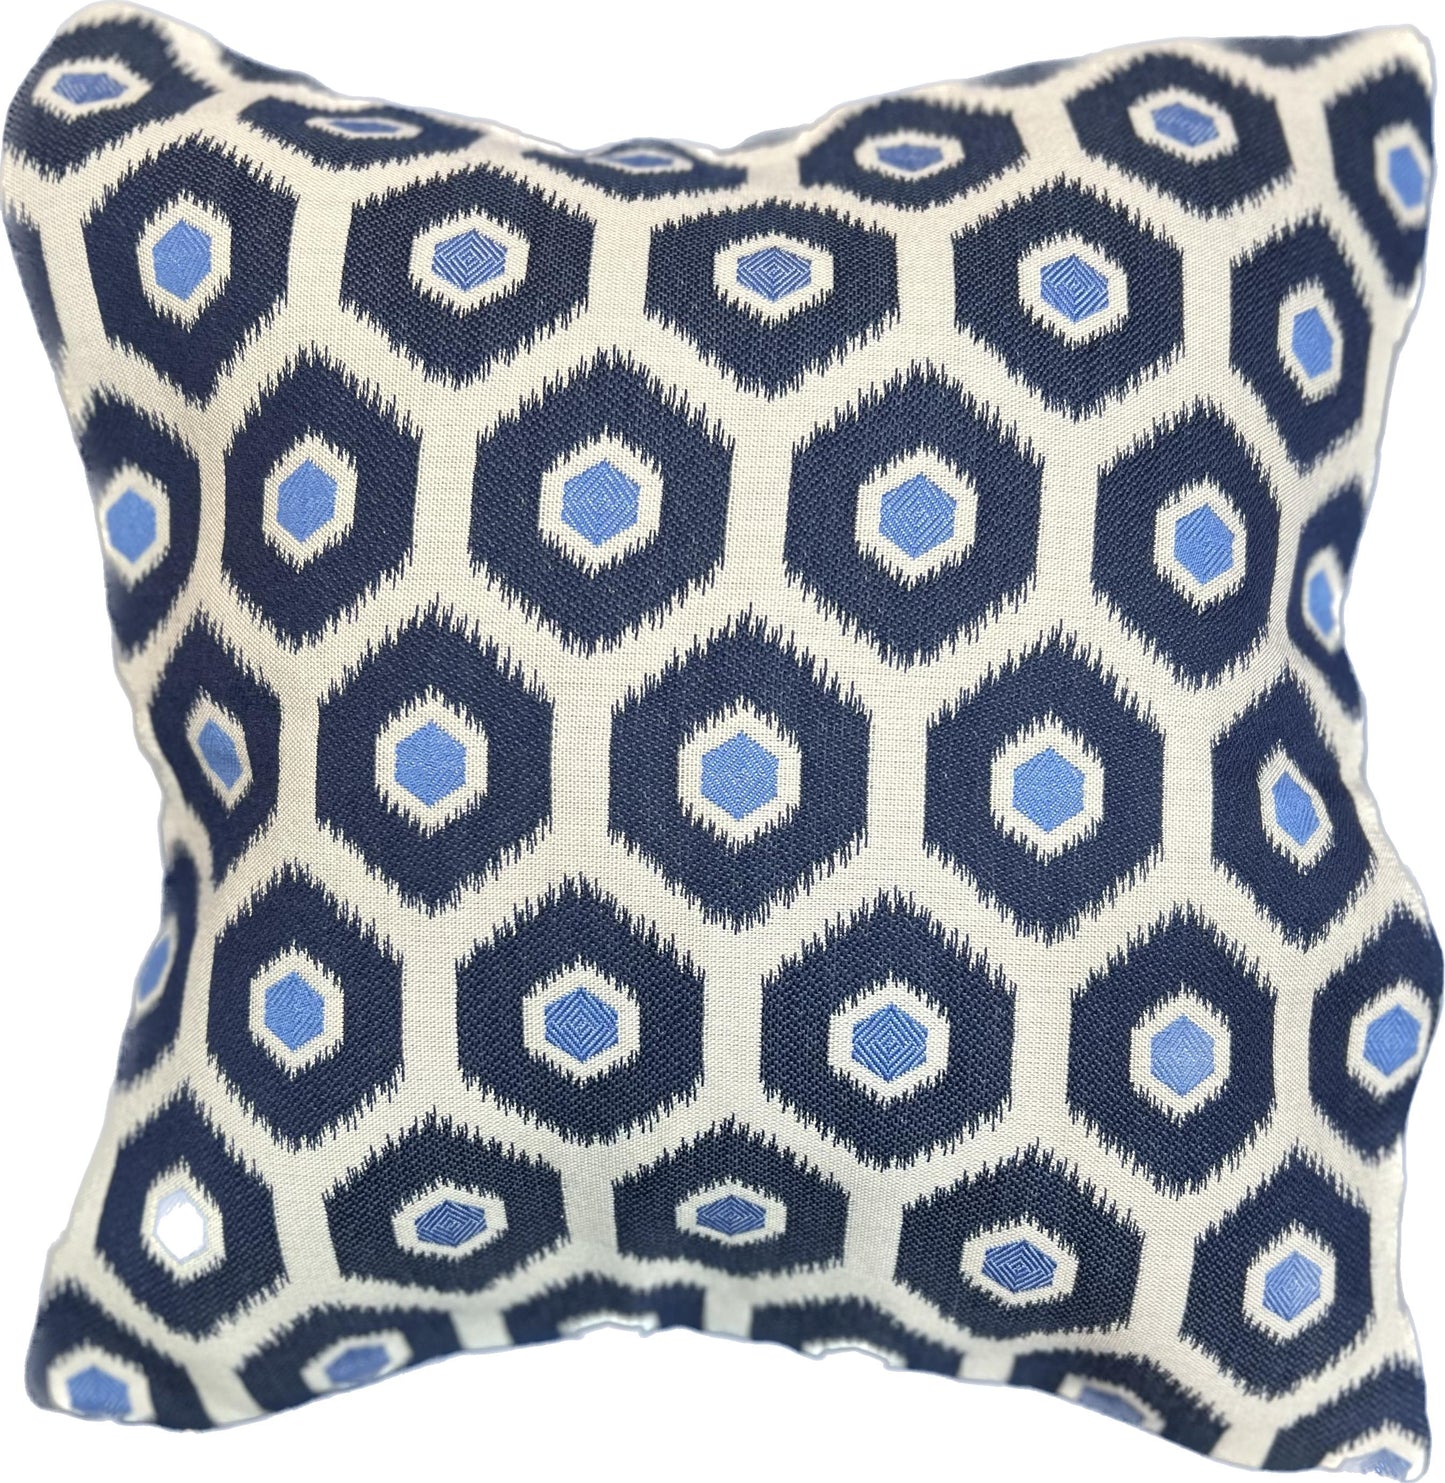 16"x16" Med Scale Pillow Cover